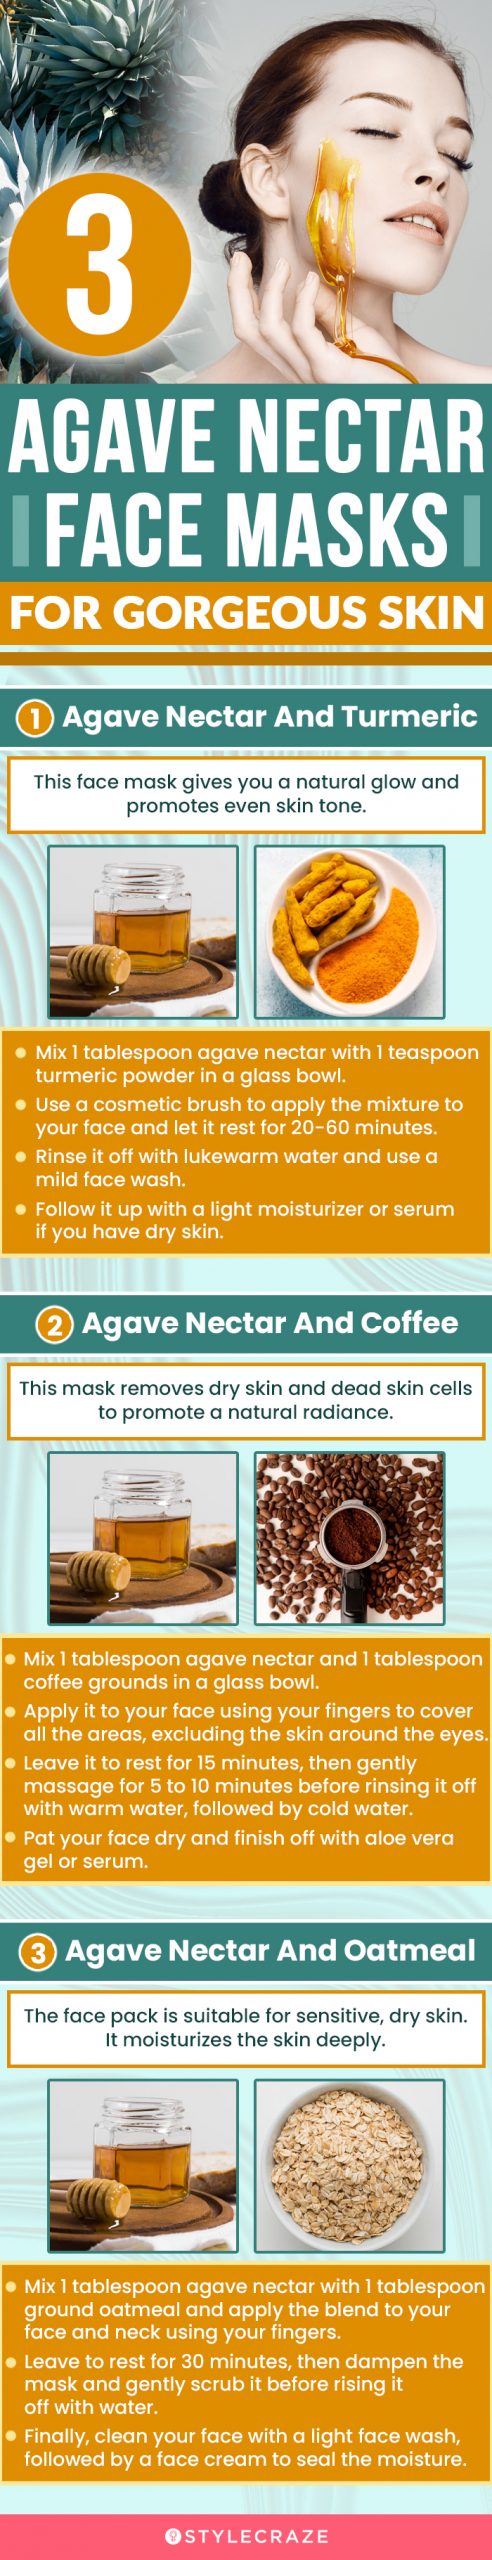 3 agave nectar face masks for gorgeous skin (infographic)